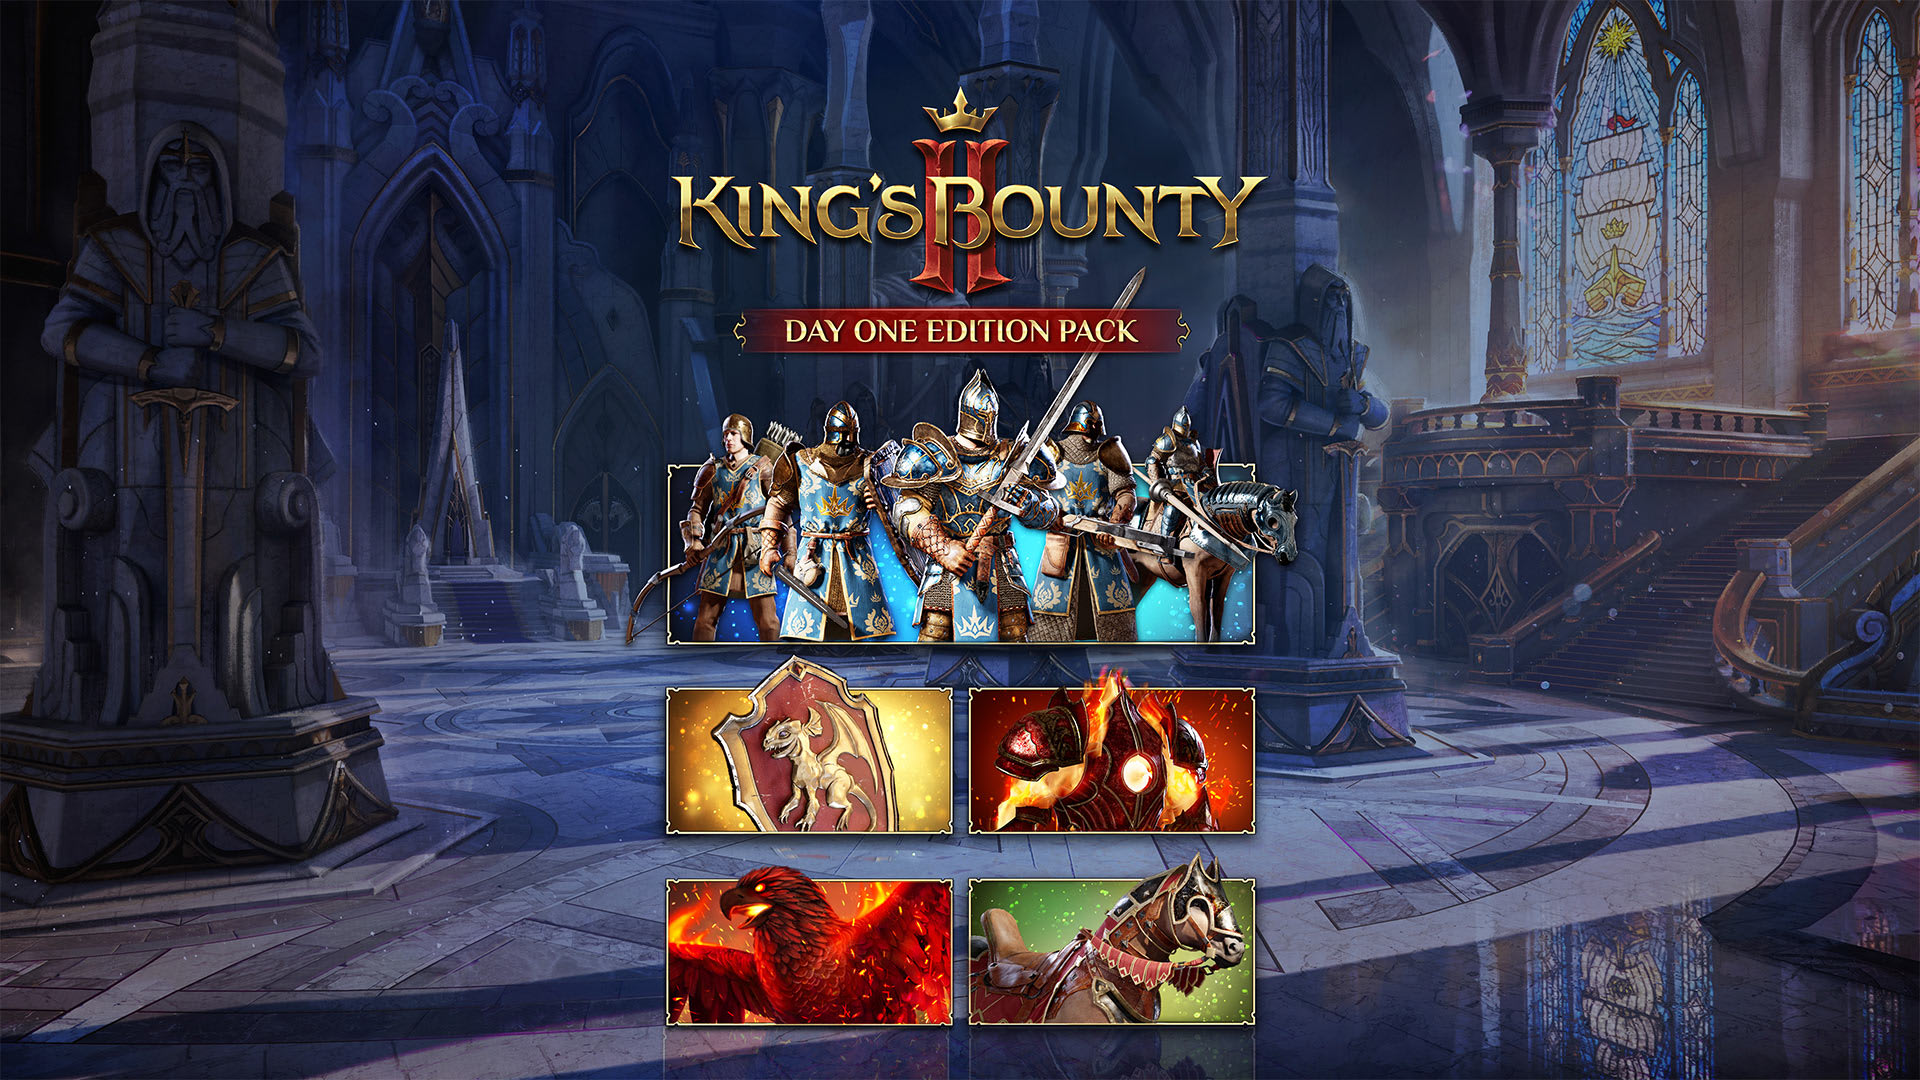 King's Bounty II - Day One Edition Pack